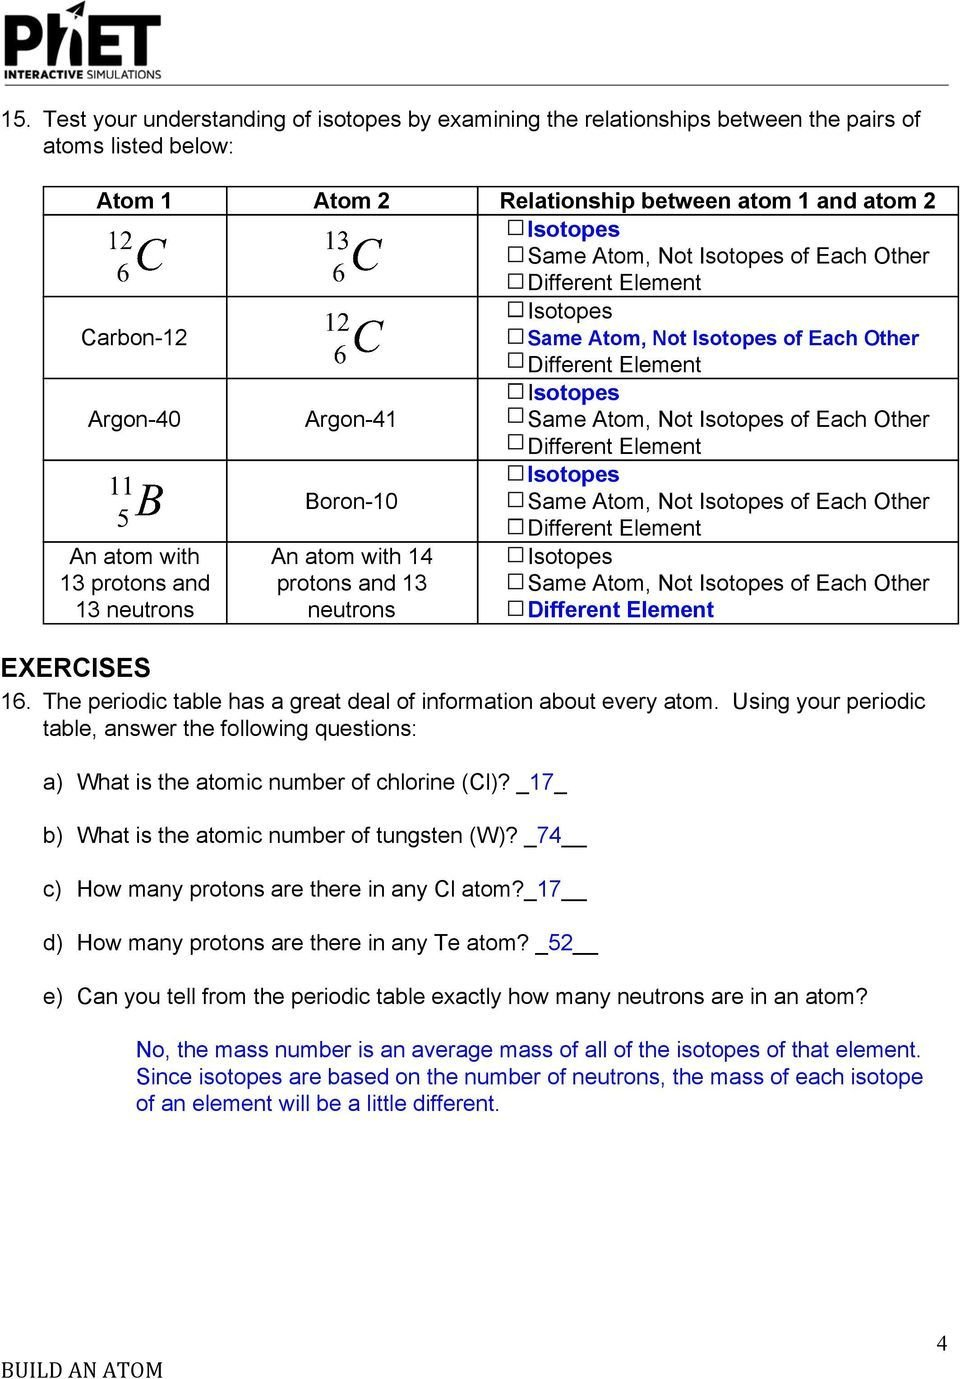 Chapter 1 Section 2 The Nature Of Science Worksheet Answers Intended For Chapter 1 Section 2 The Nature Of Science Worksheet Answers